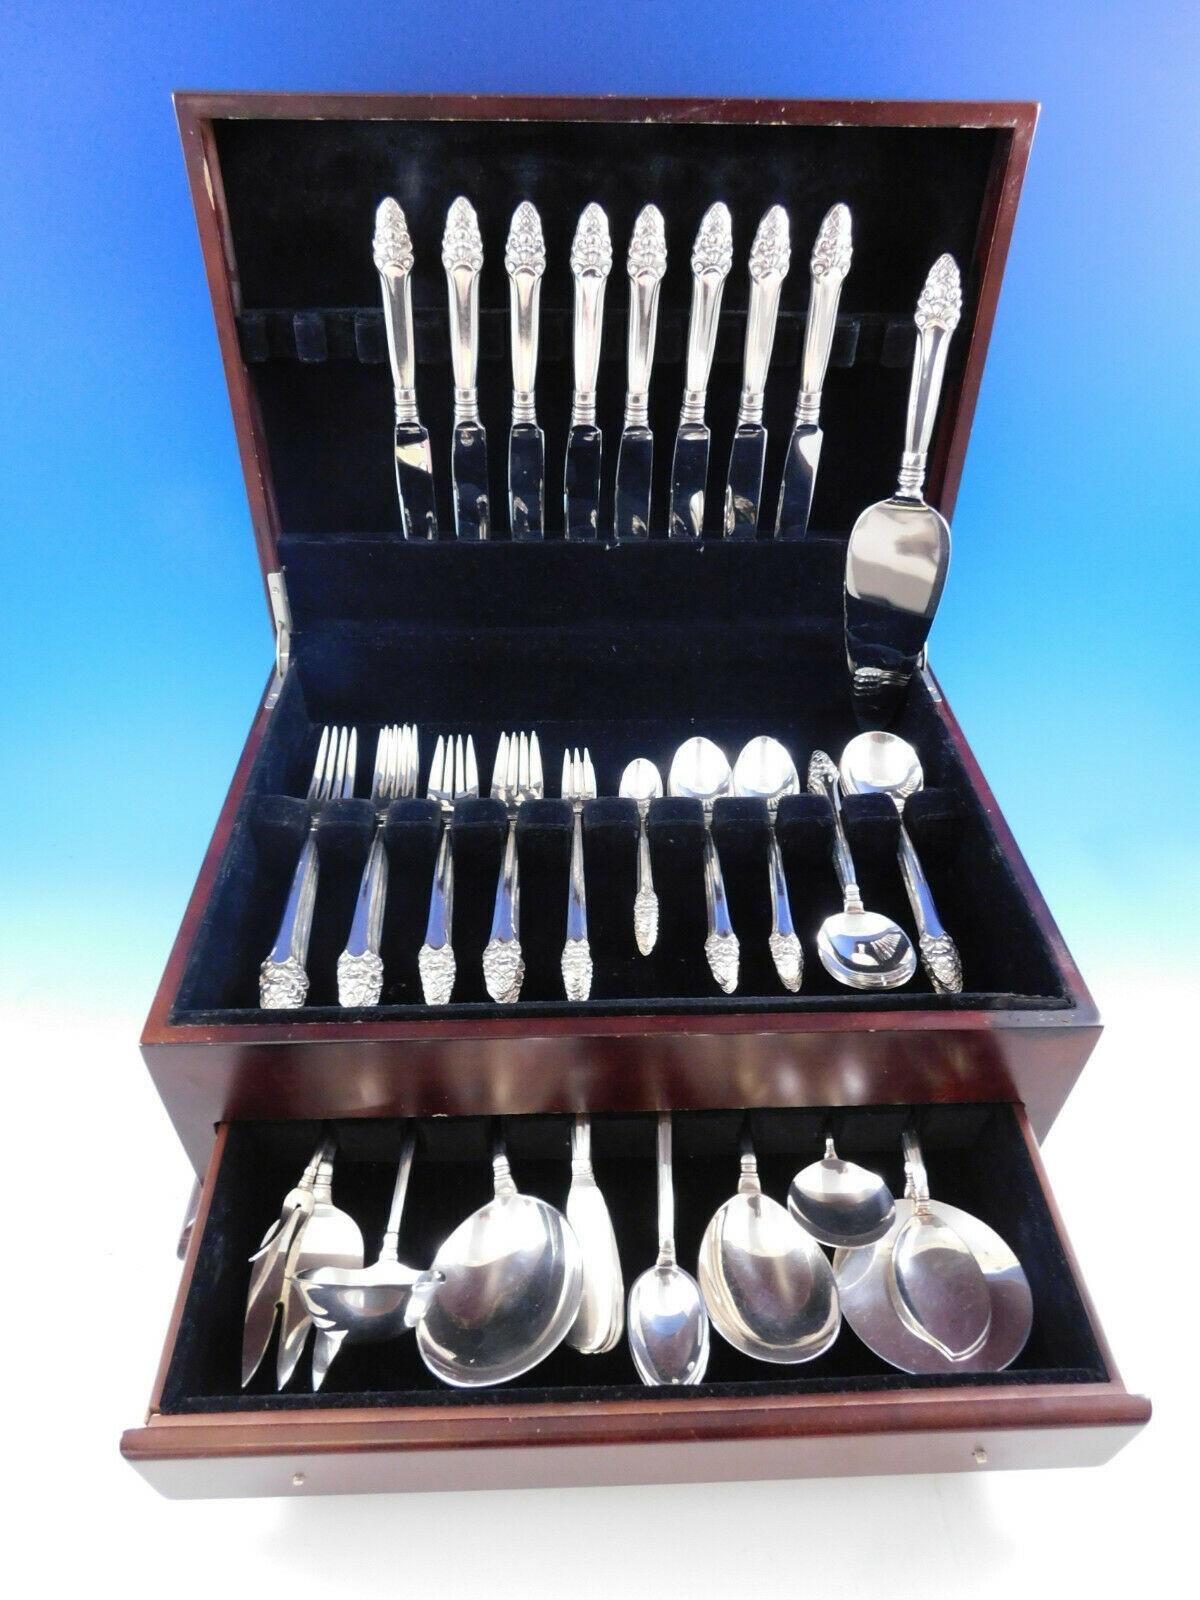 Sovereign Old by Gorham (1941) sterling silver flatware set with stylized acorn or pineapple motif - 81 pieces. This set includes:

8 knives, 8 7/8